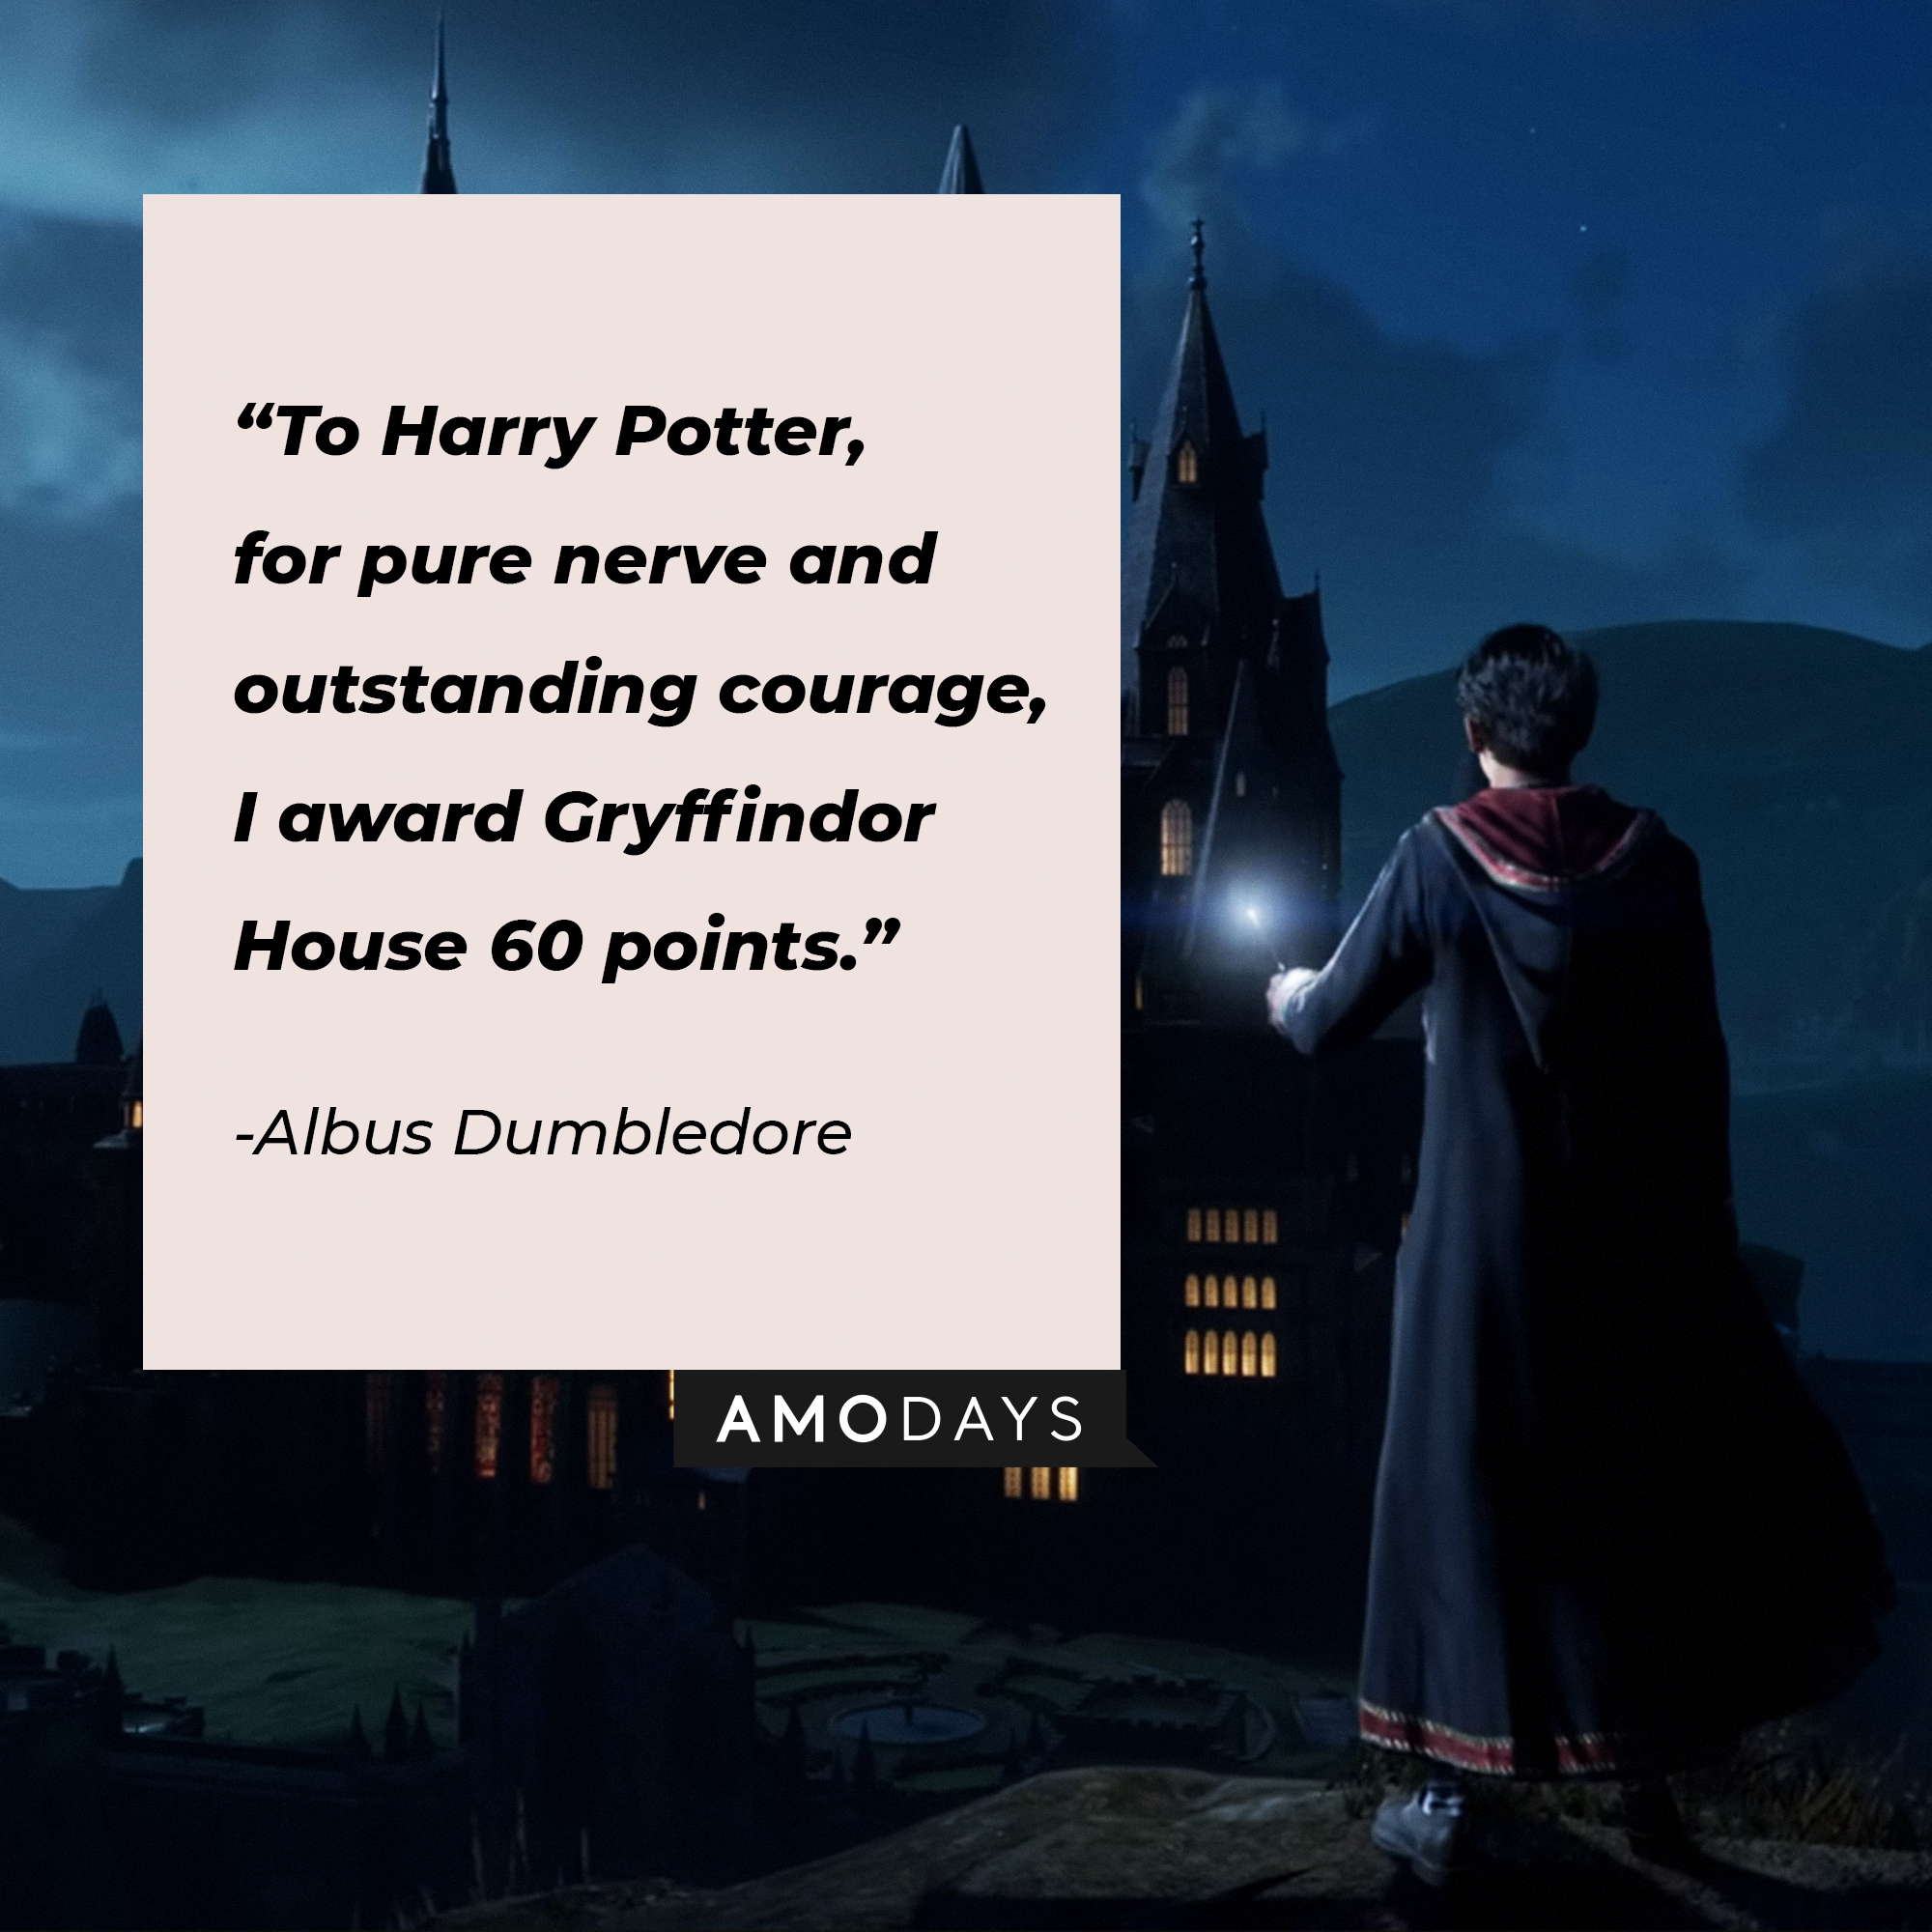 Albus Dumbledore's quote: "To Harry Potter, for pure nerve and outstanding courage, I award Gryffindor House 60 points." | Source: Youtube.com/HogwartsLegacy